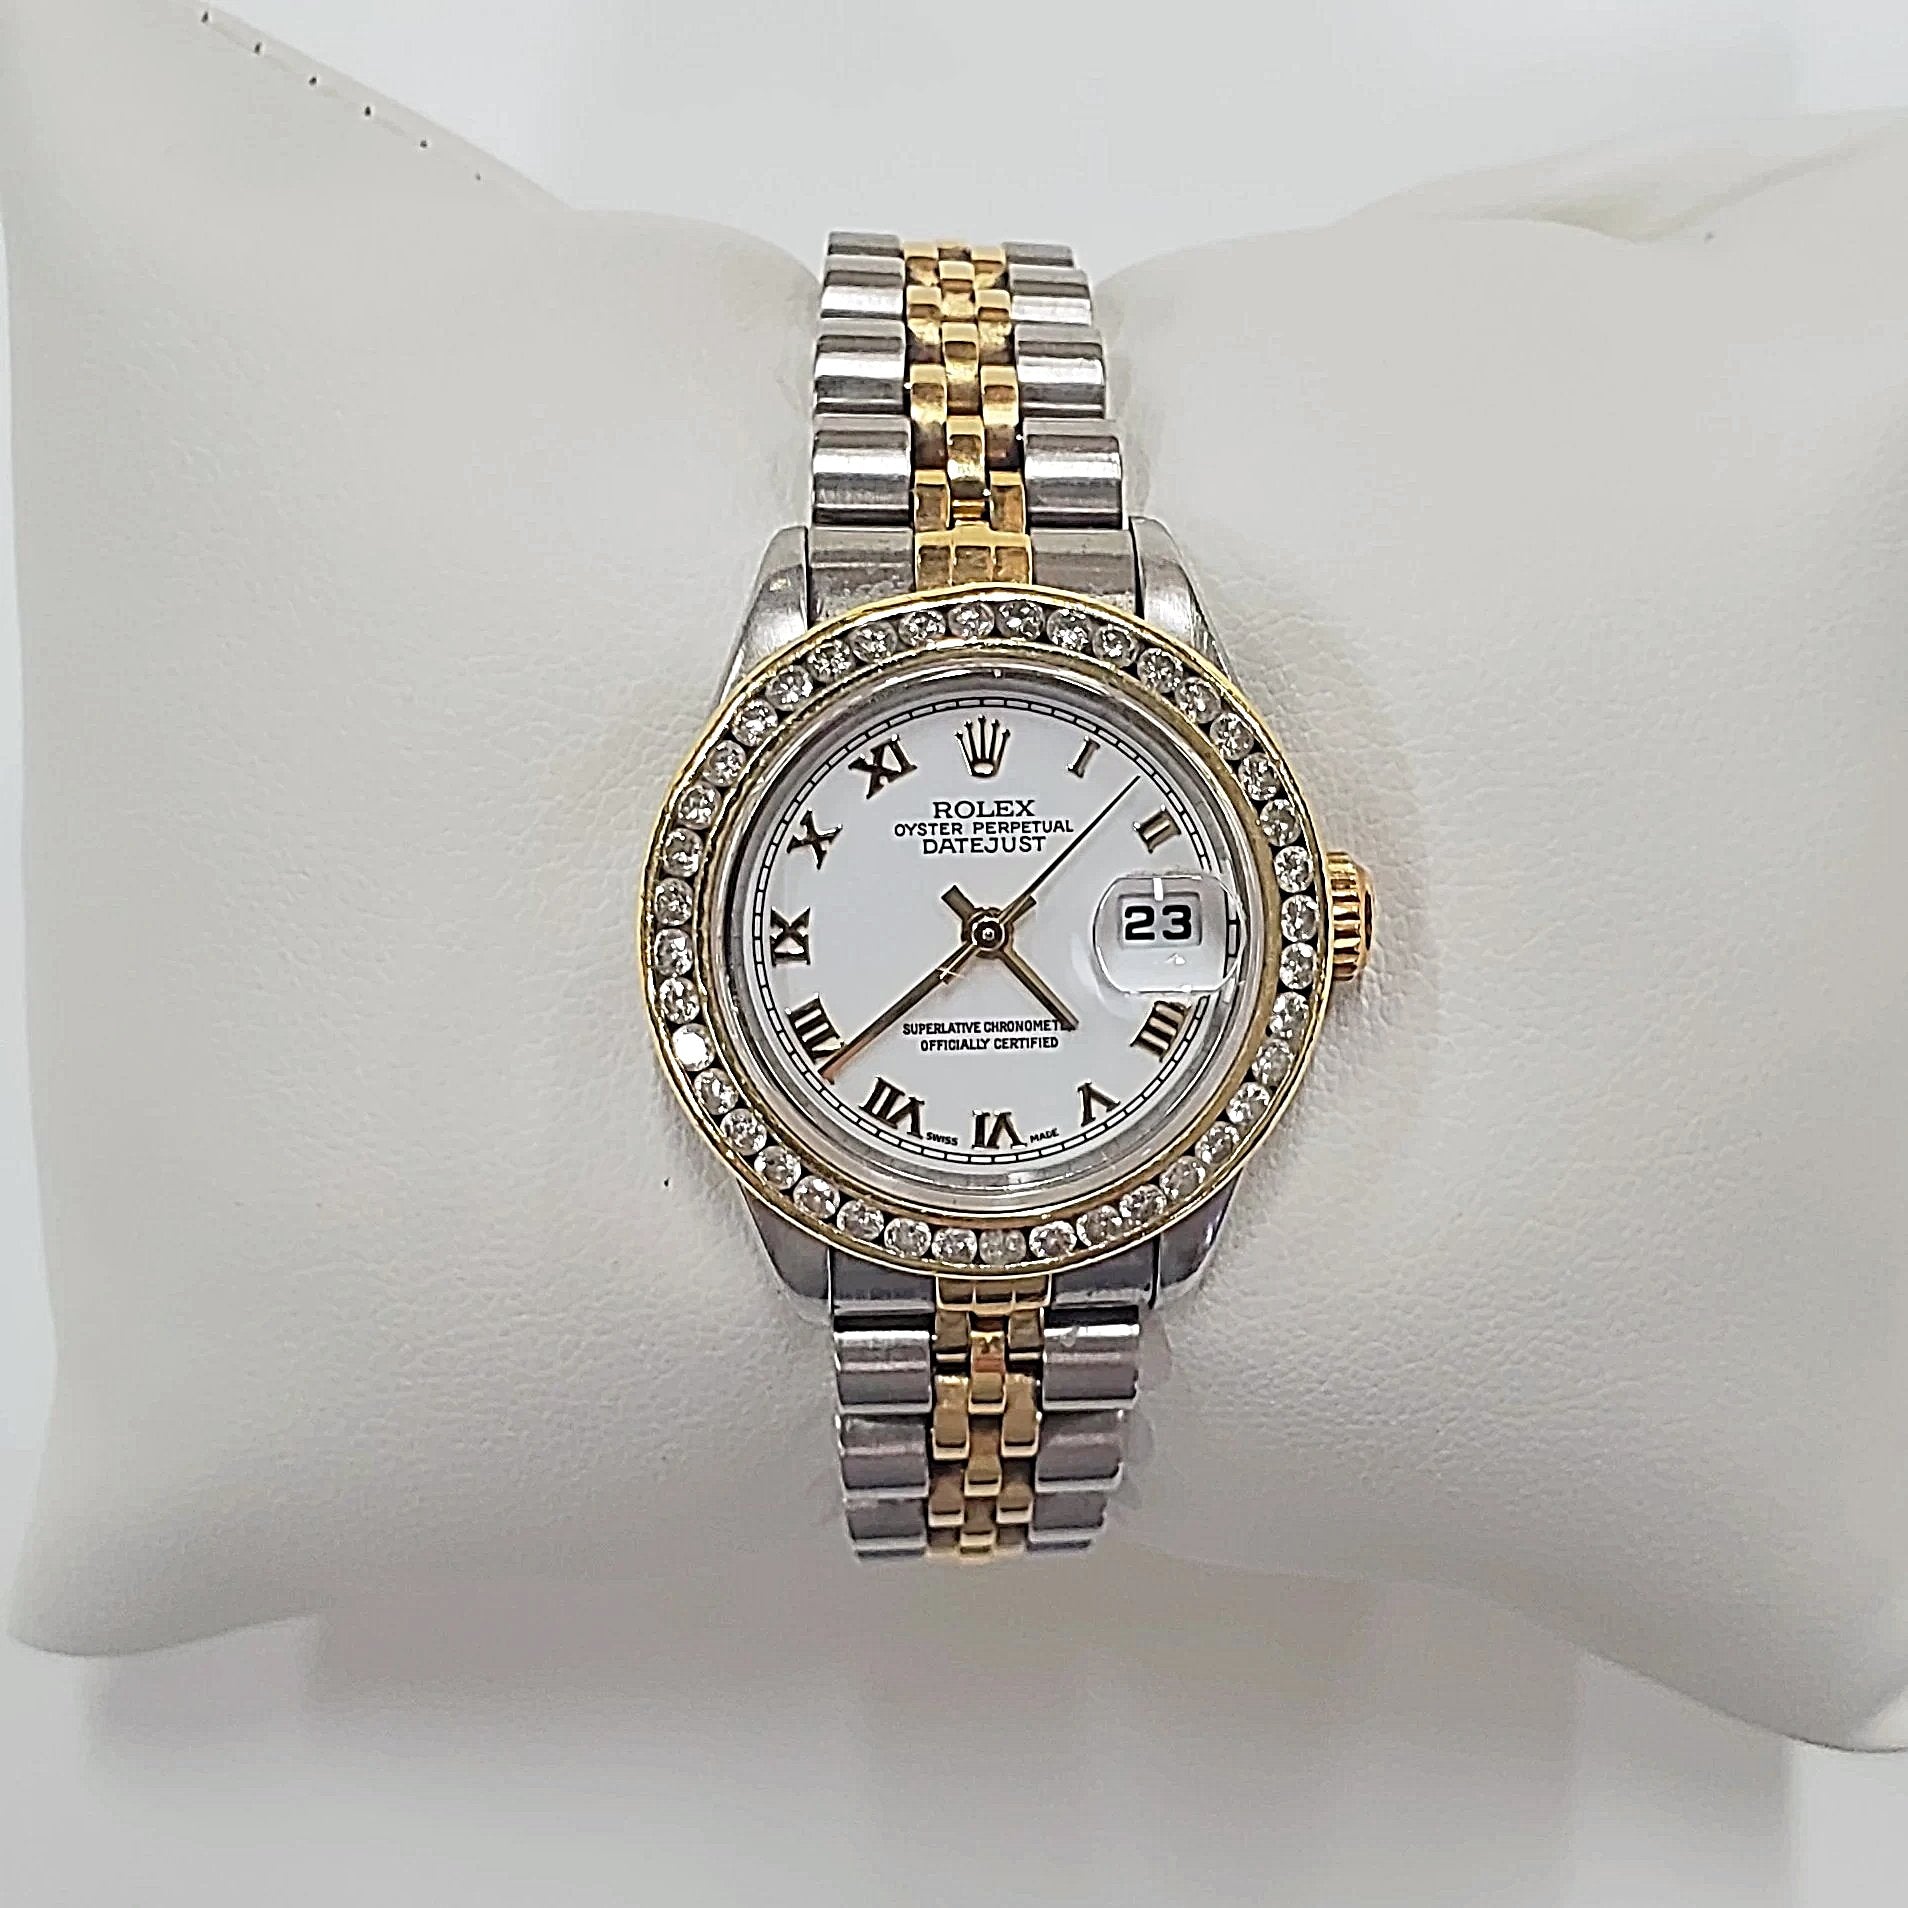 Ladies Rolex 18K Gold Two Tone 26mm DateJust Watch with Diamond Bezel, White Dial and Roman Numerals. (Pre-Owned)